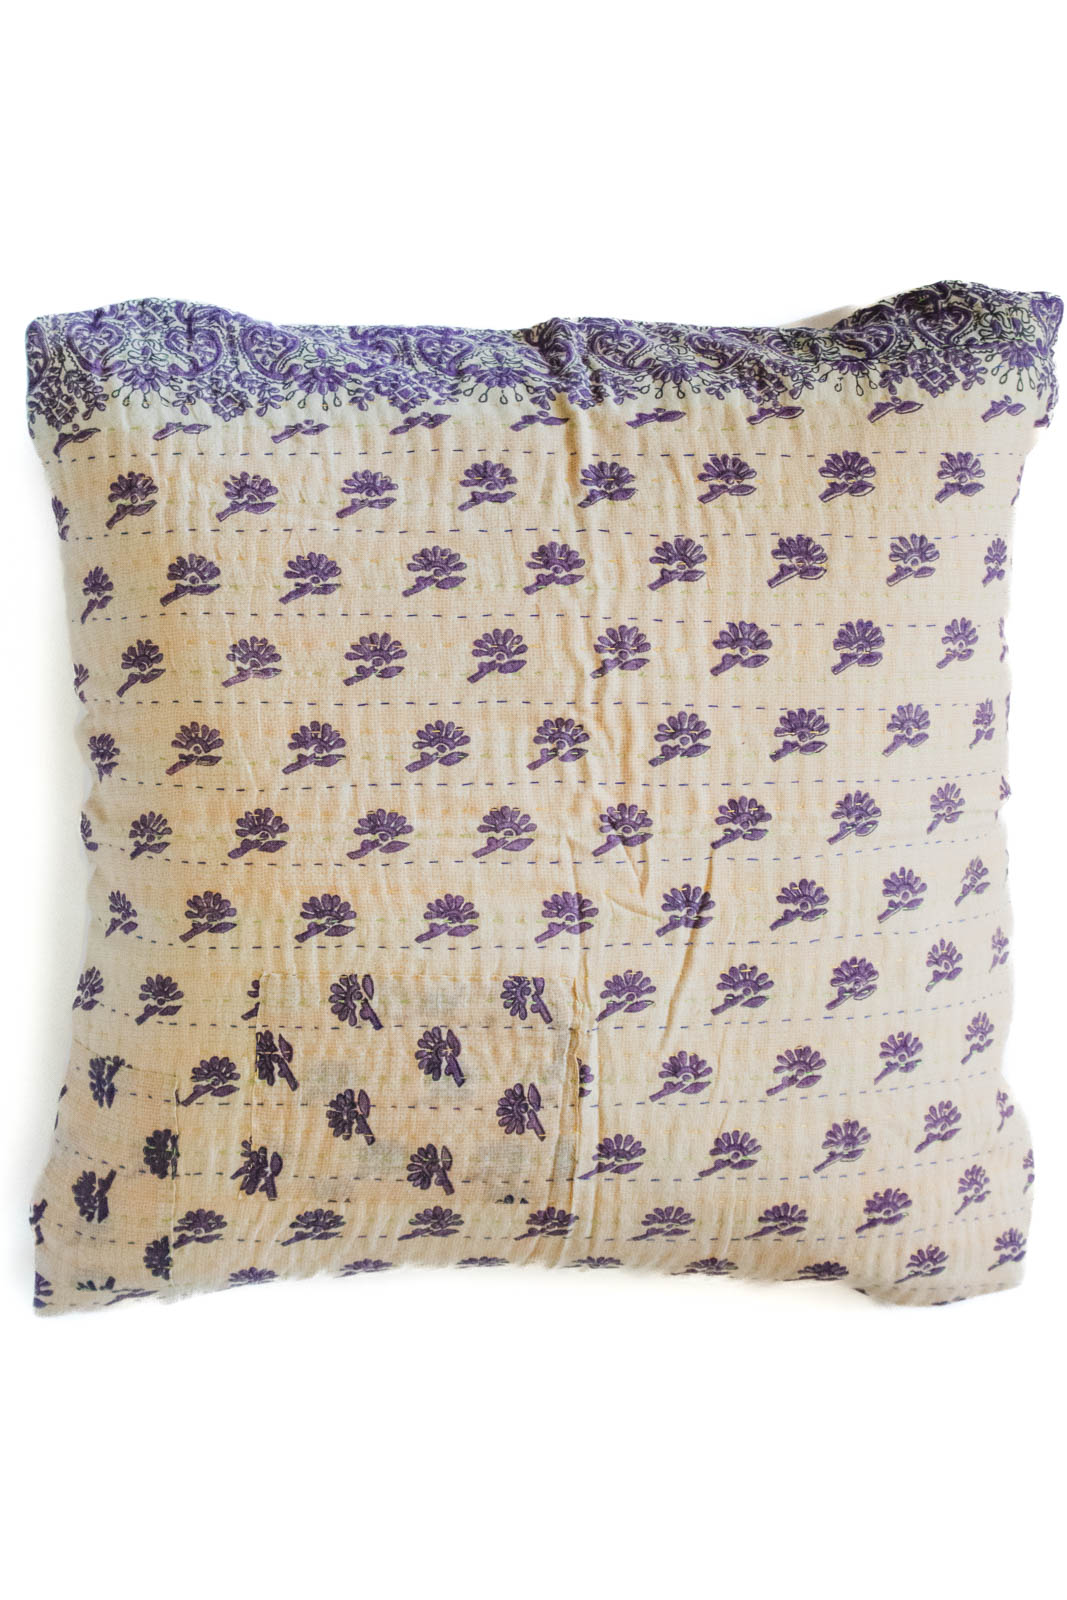 Restore no. 2 Kantha Pillow Cover